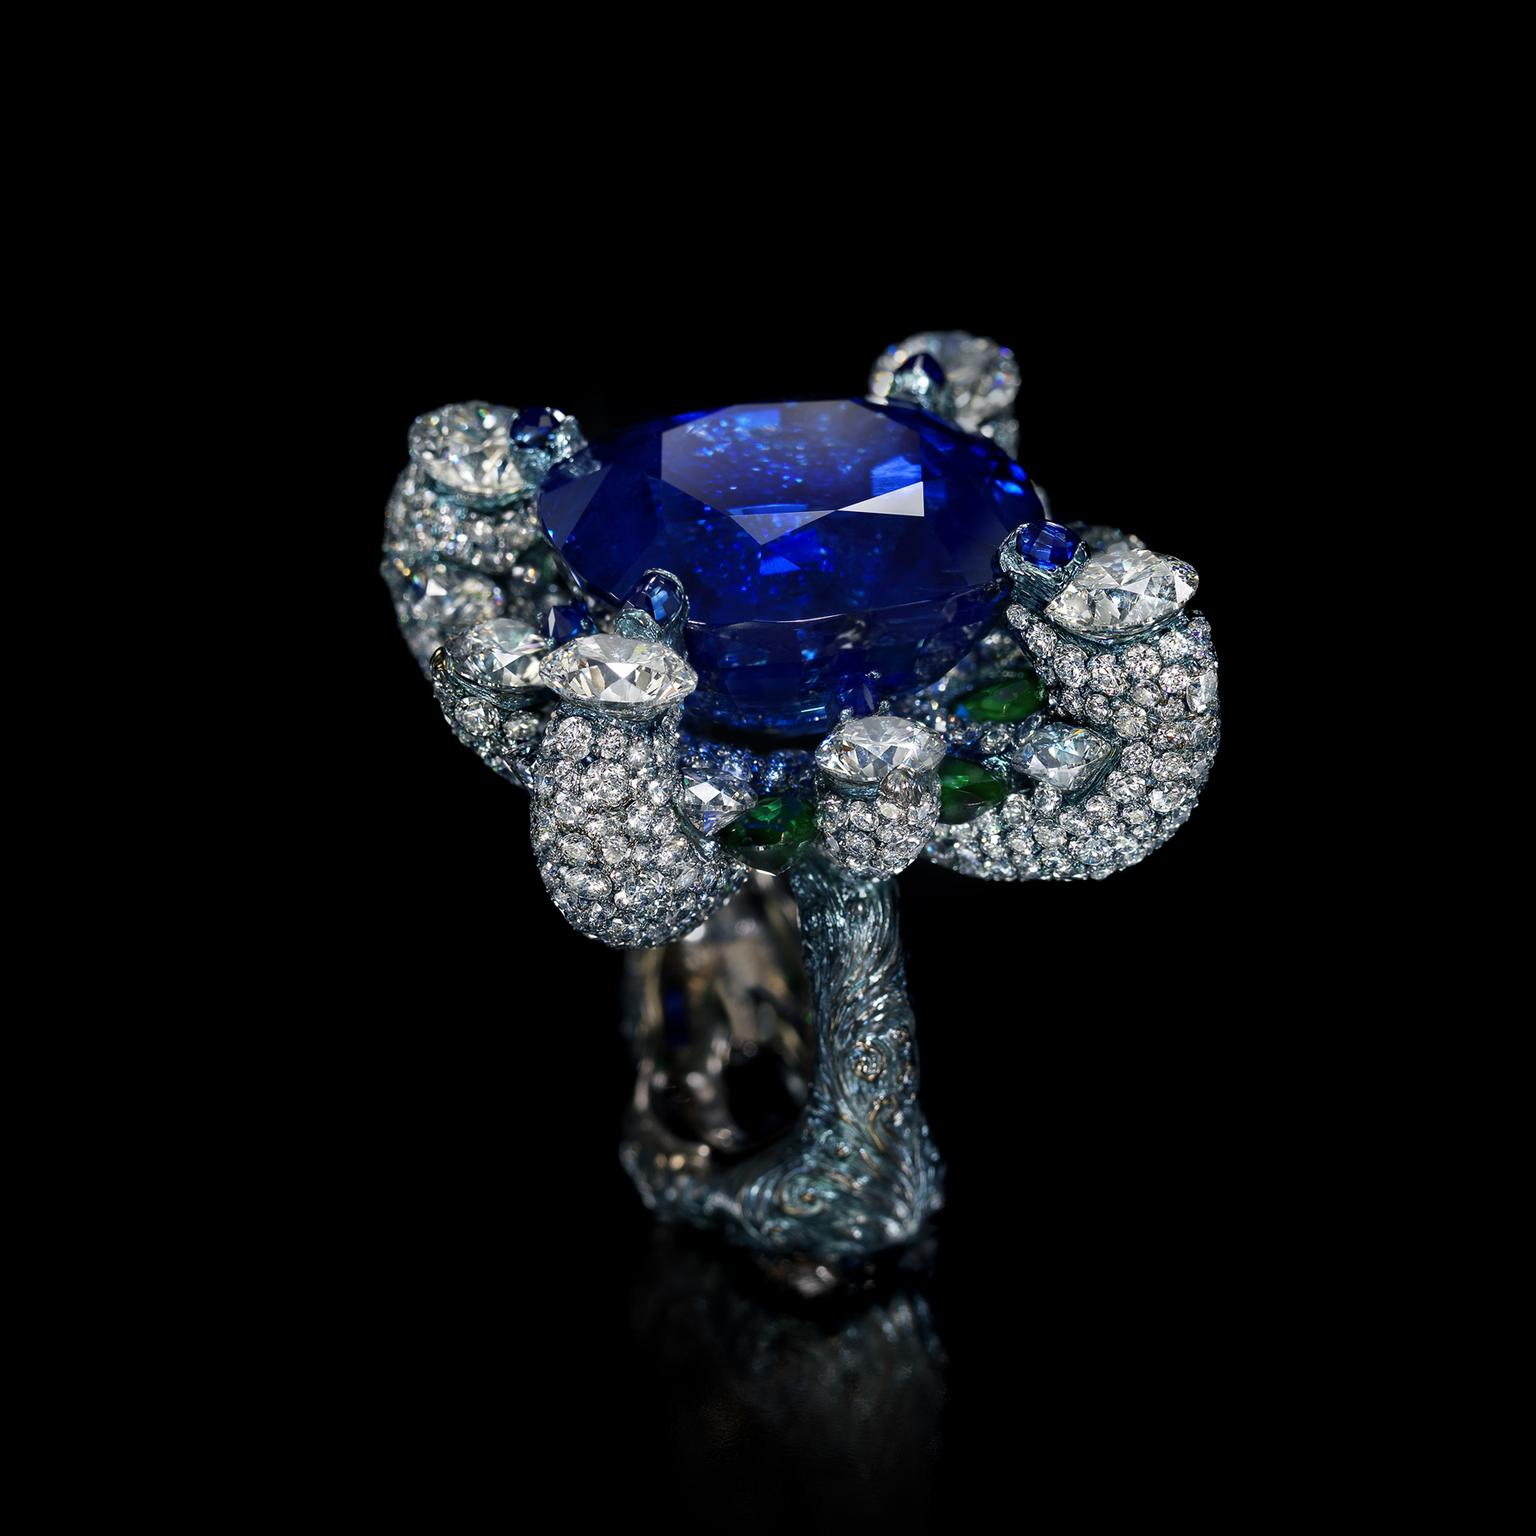 Wallace Chan Beauteous Days sapphire ring in blue titanium